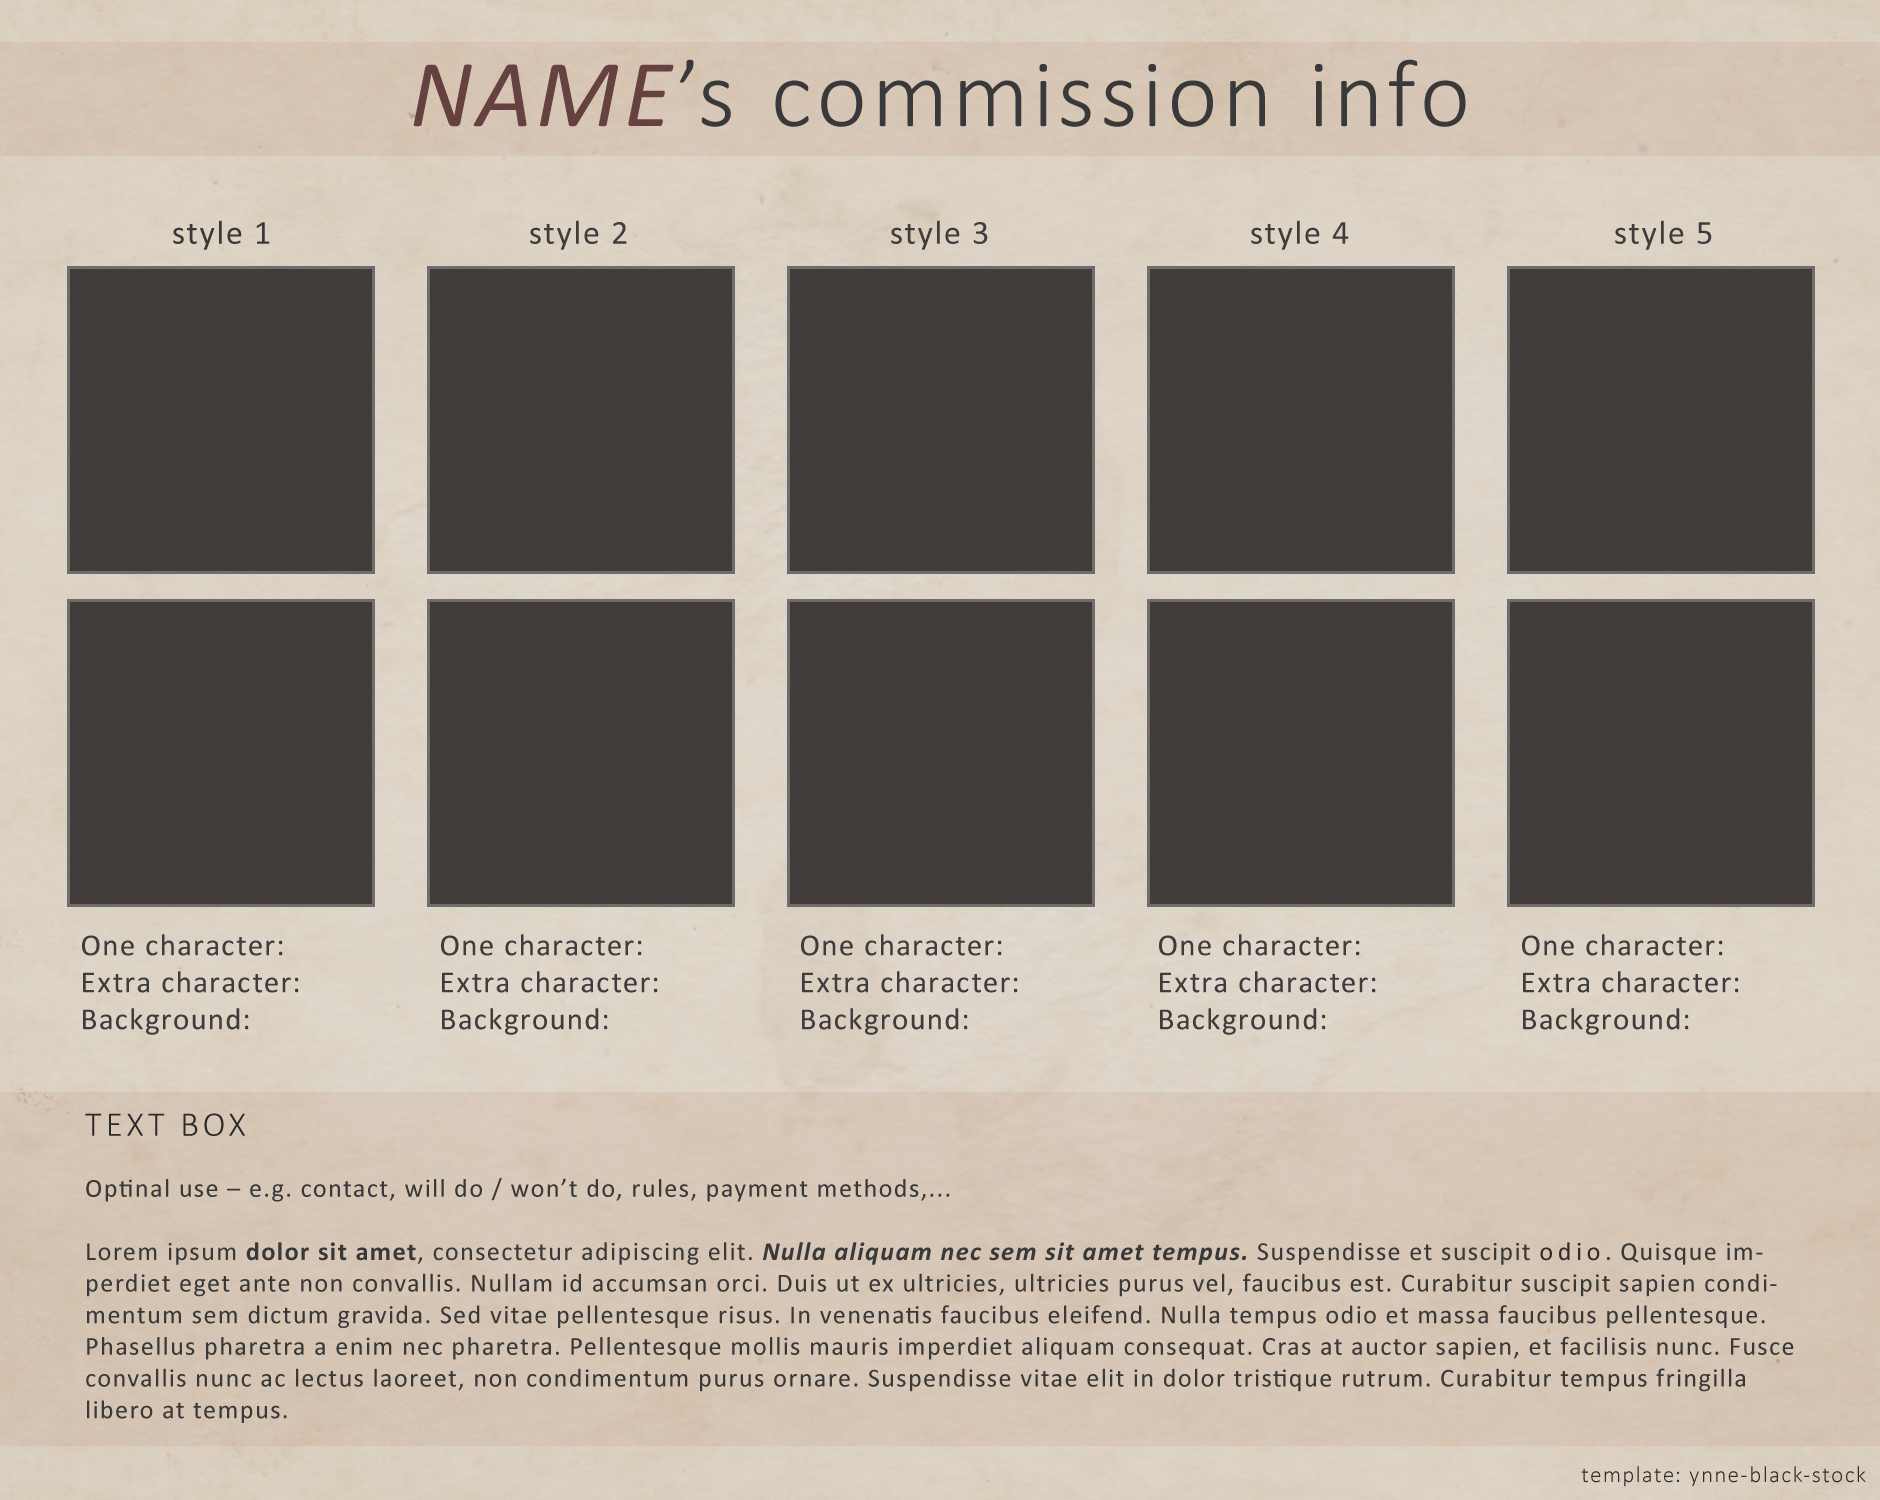 Commission Sheet And Character Templates On Bringbackfairprices Deviantart